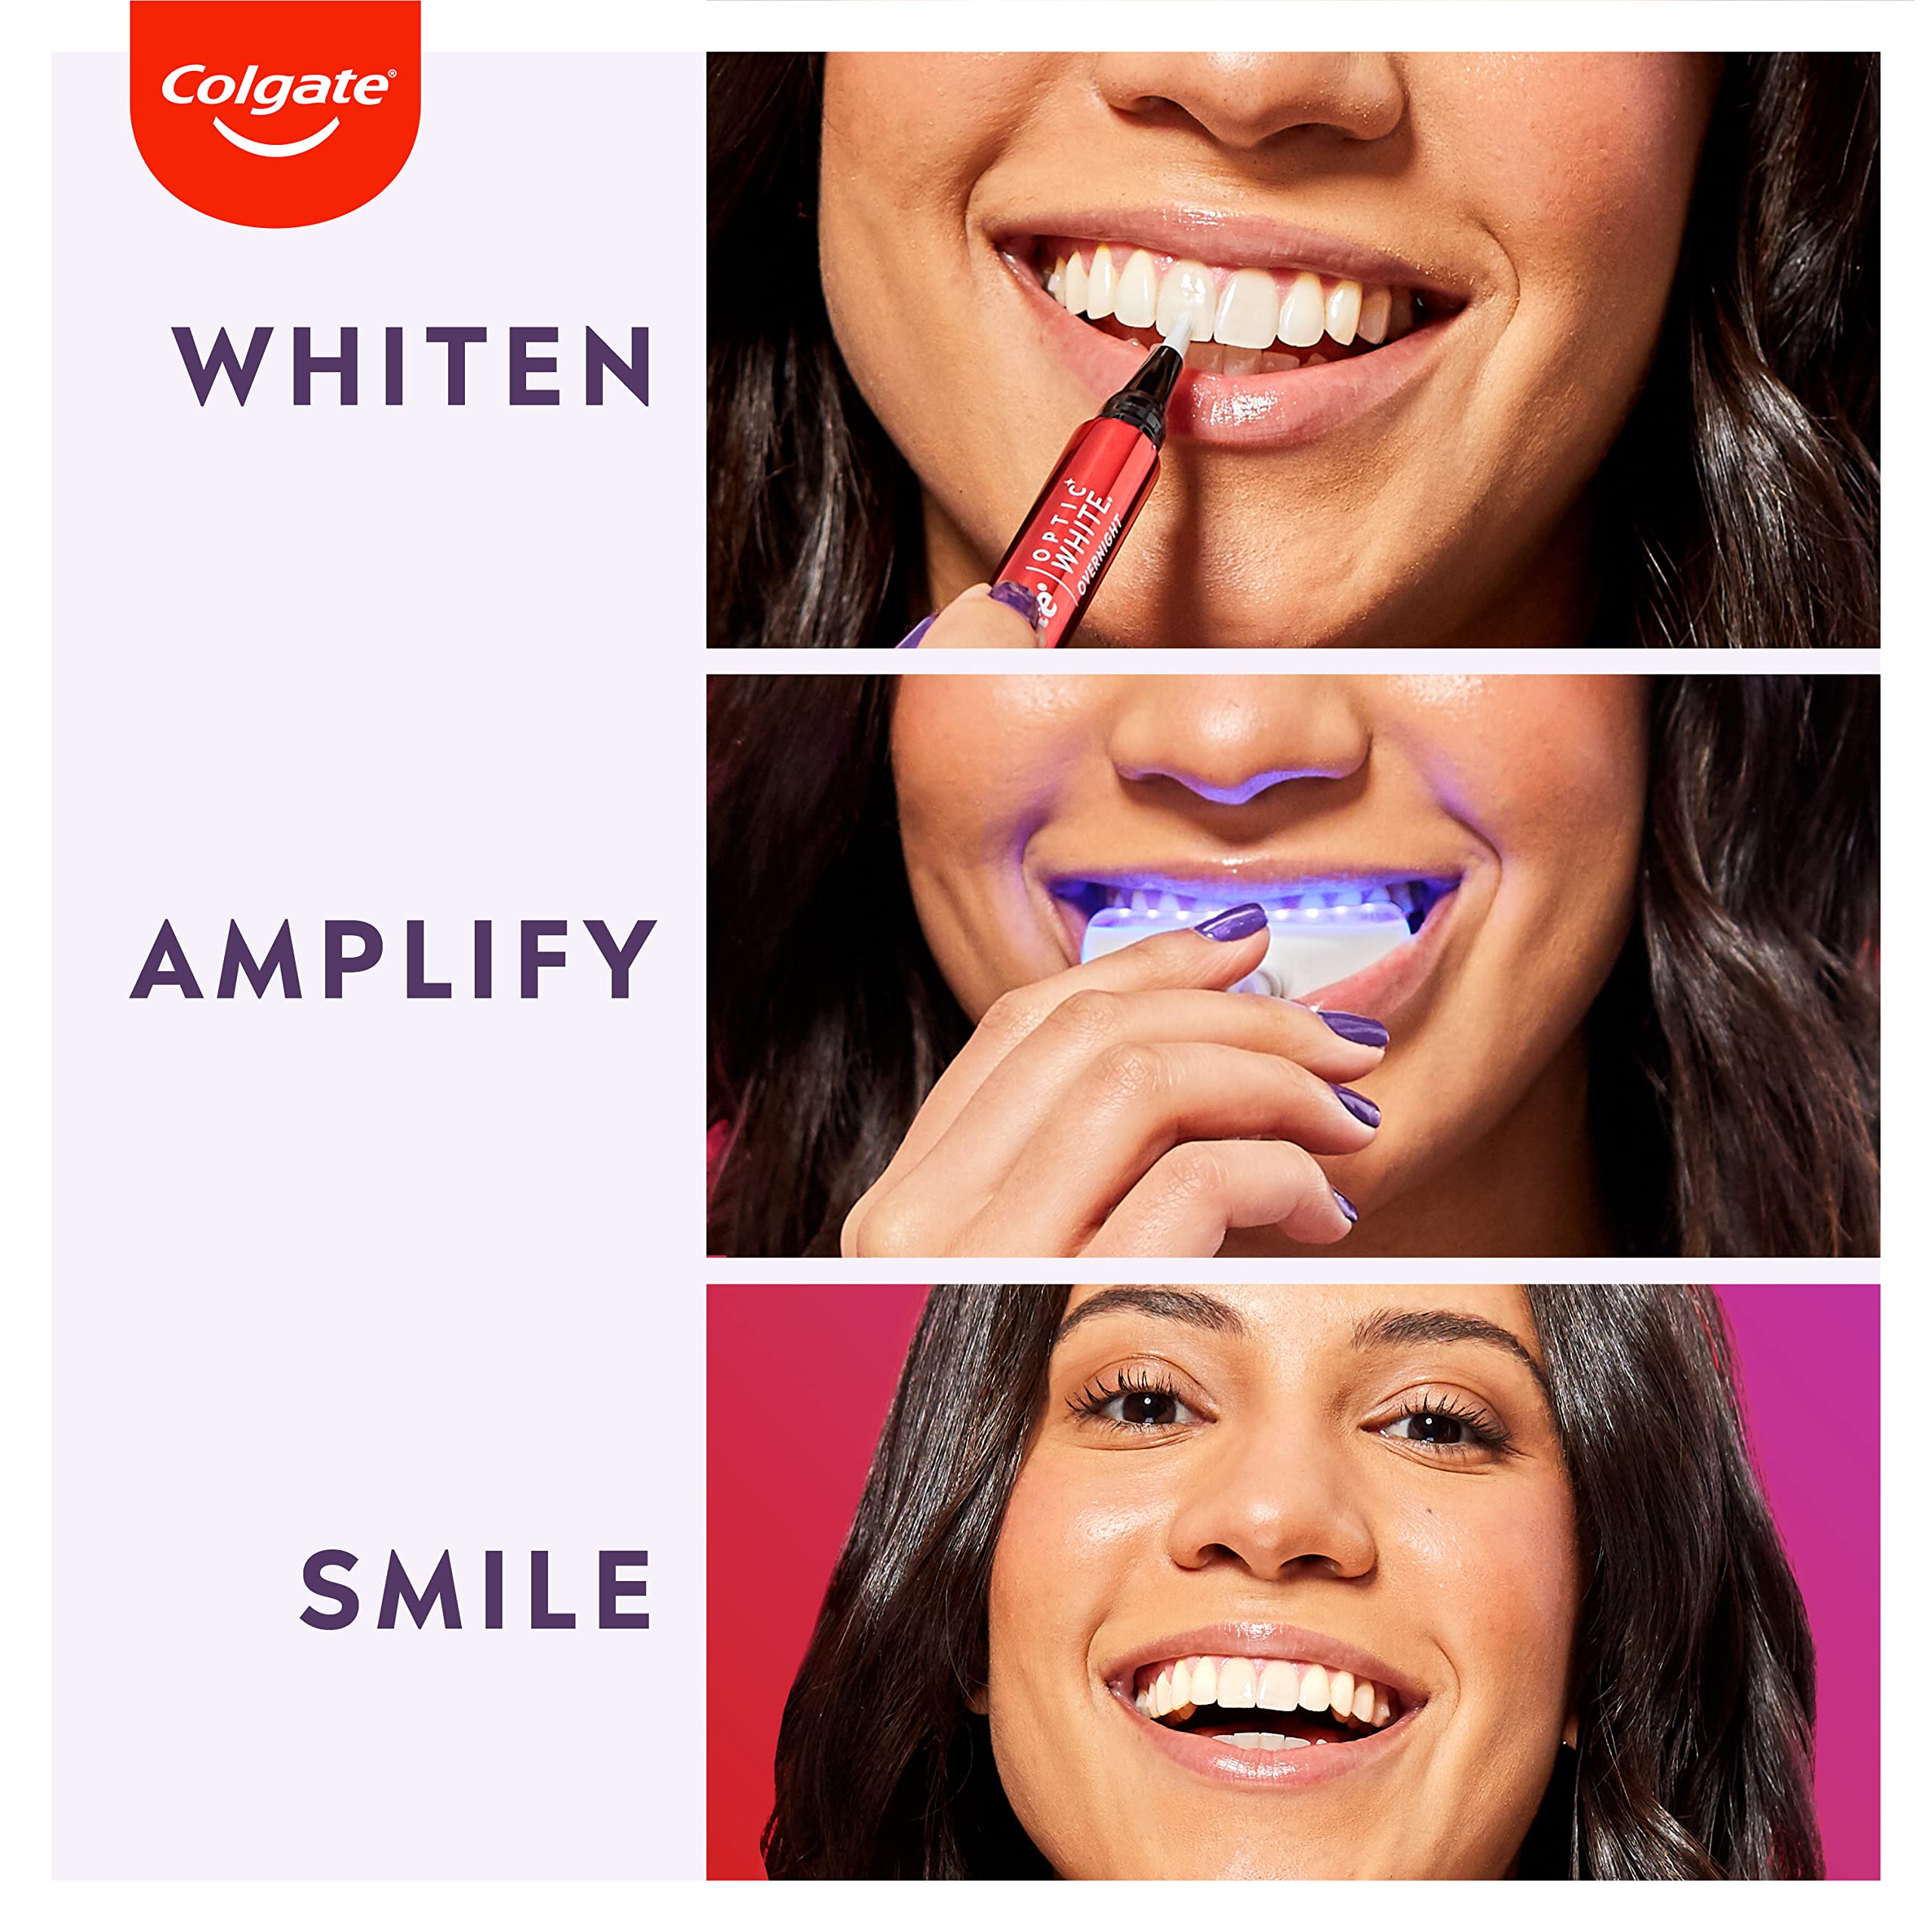 Colgate Optic White ComfortFit Teeth Whitening Kit with LED Light and Whitening Pen, LED Teeth Whitening Kit, Enamel Safe, Works with iPhone and Android